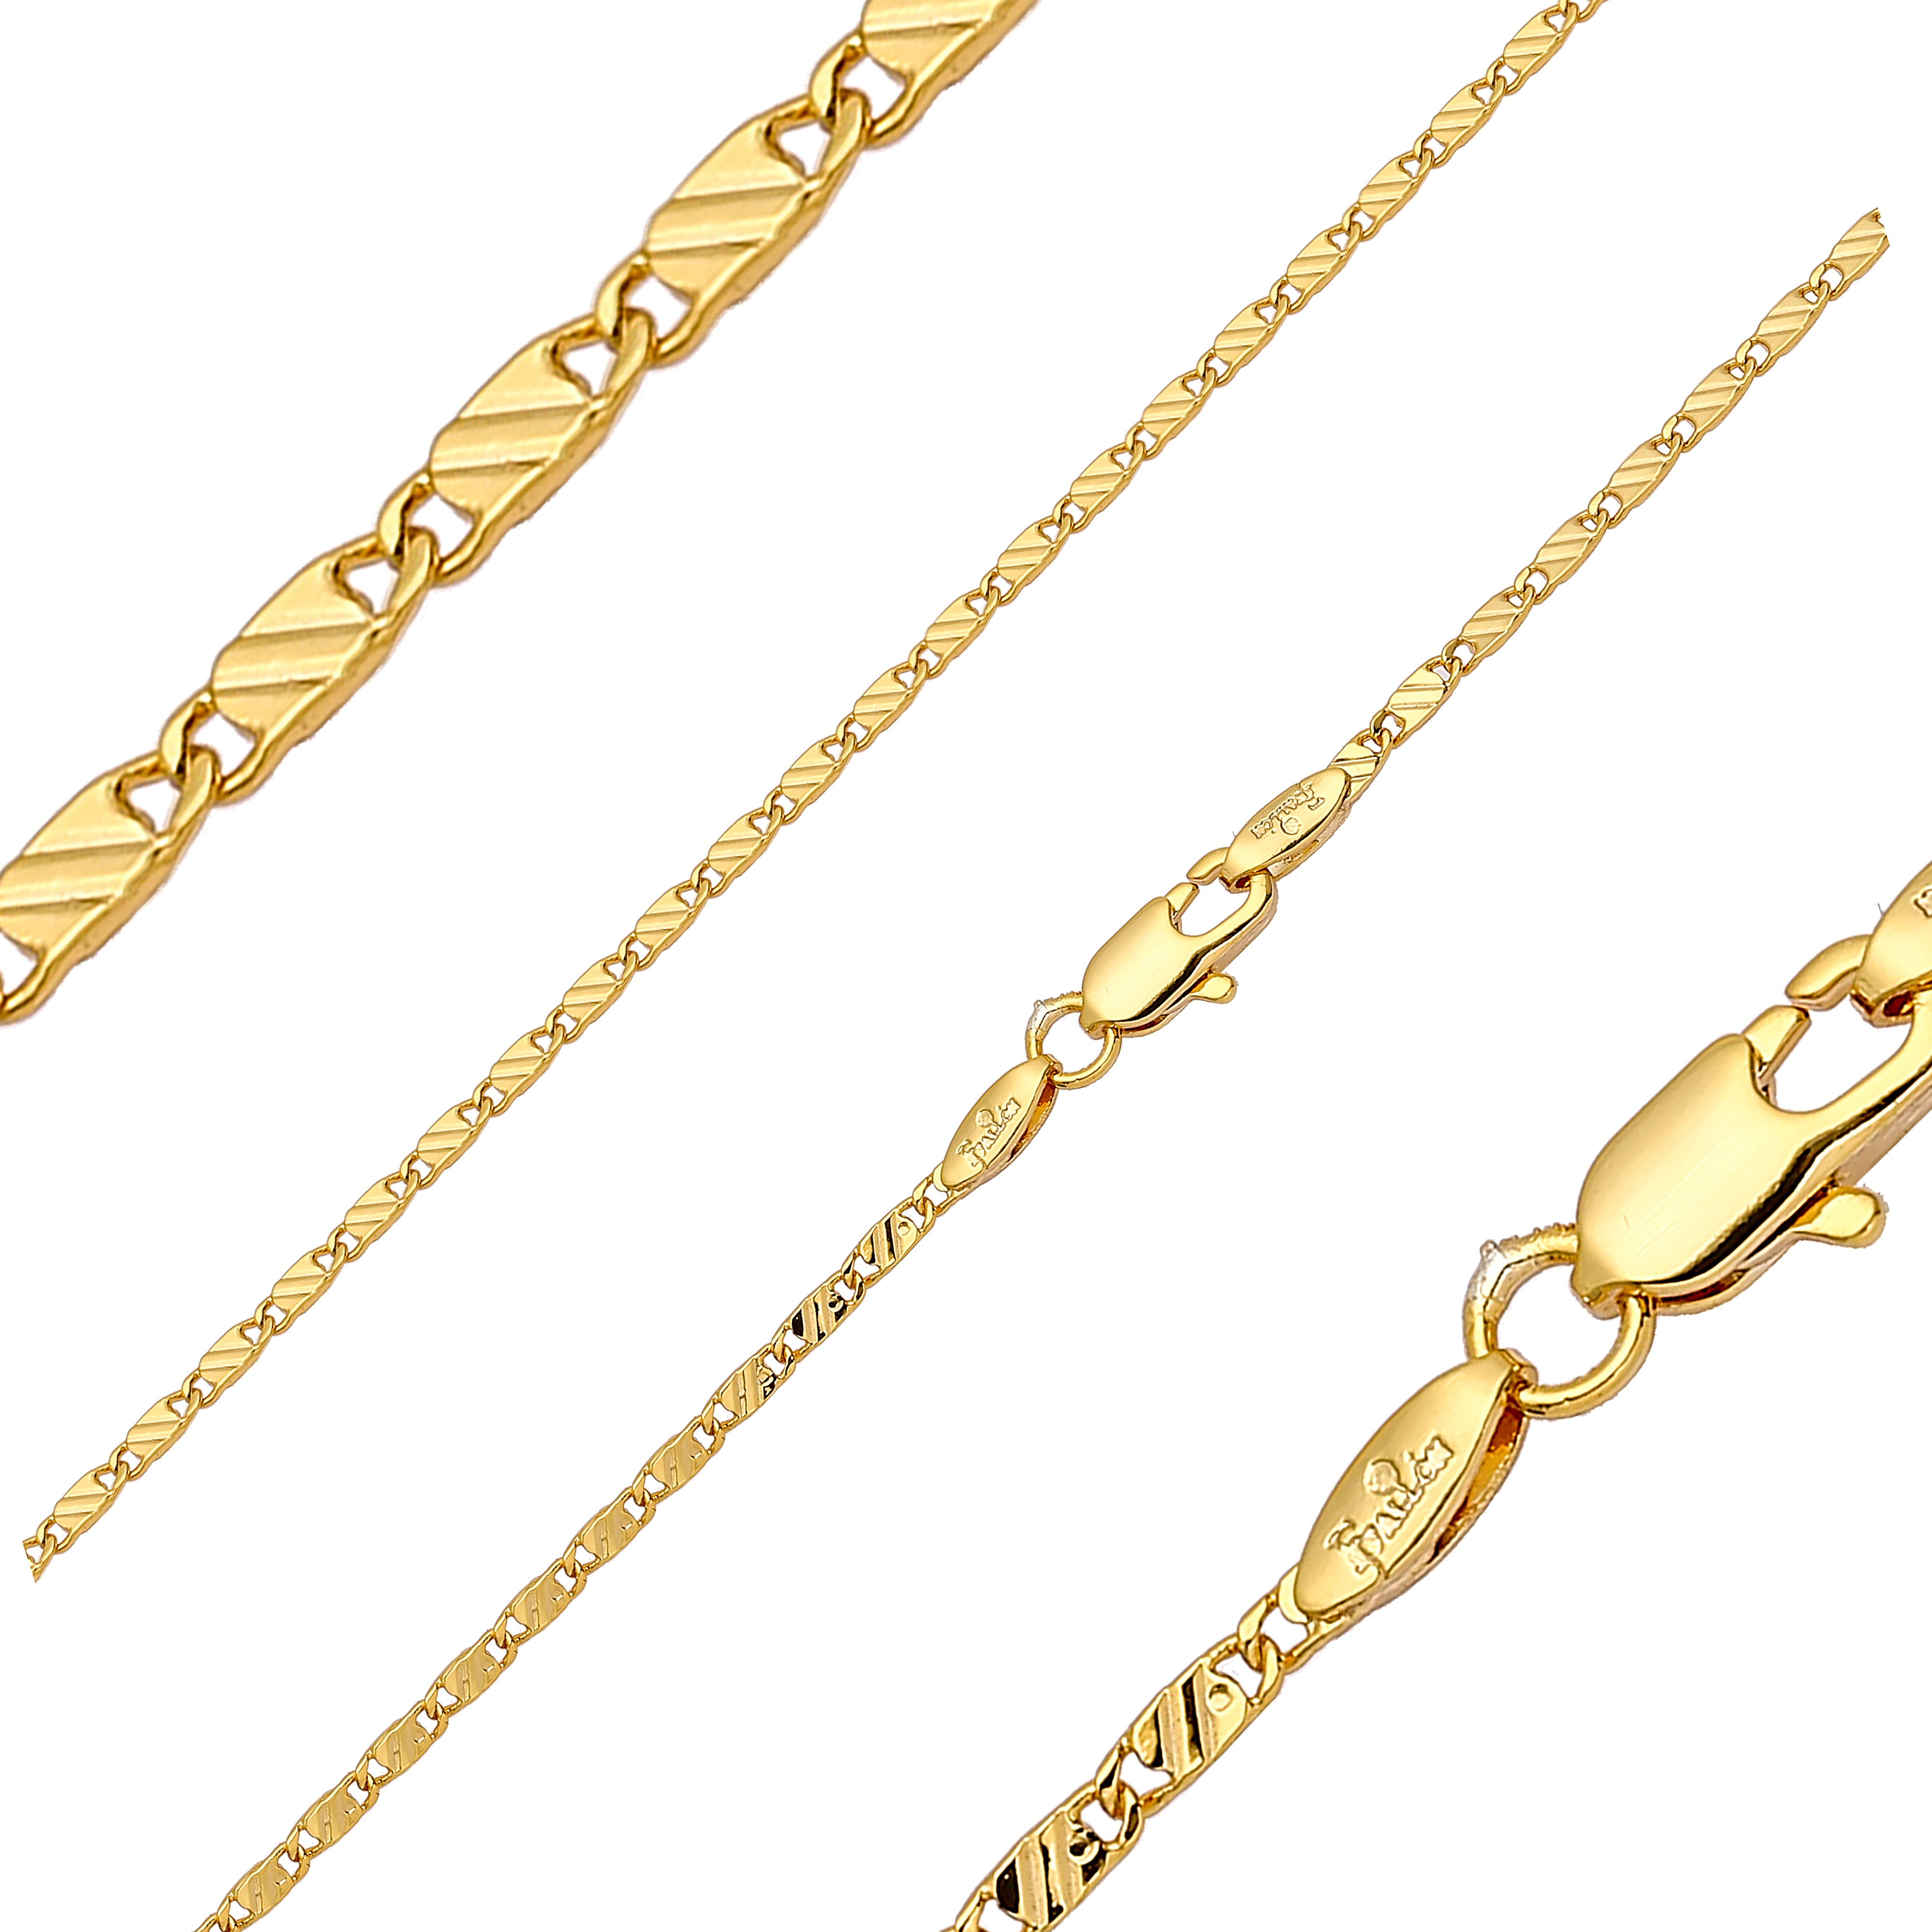 Solid snail link hammered chains plated in 14K Gold, Rose Gold, two tone, white gold